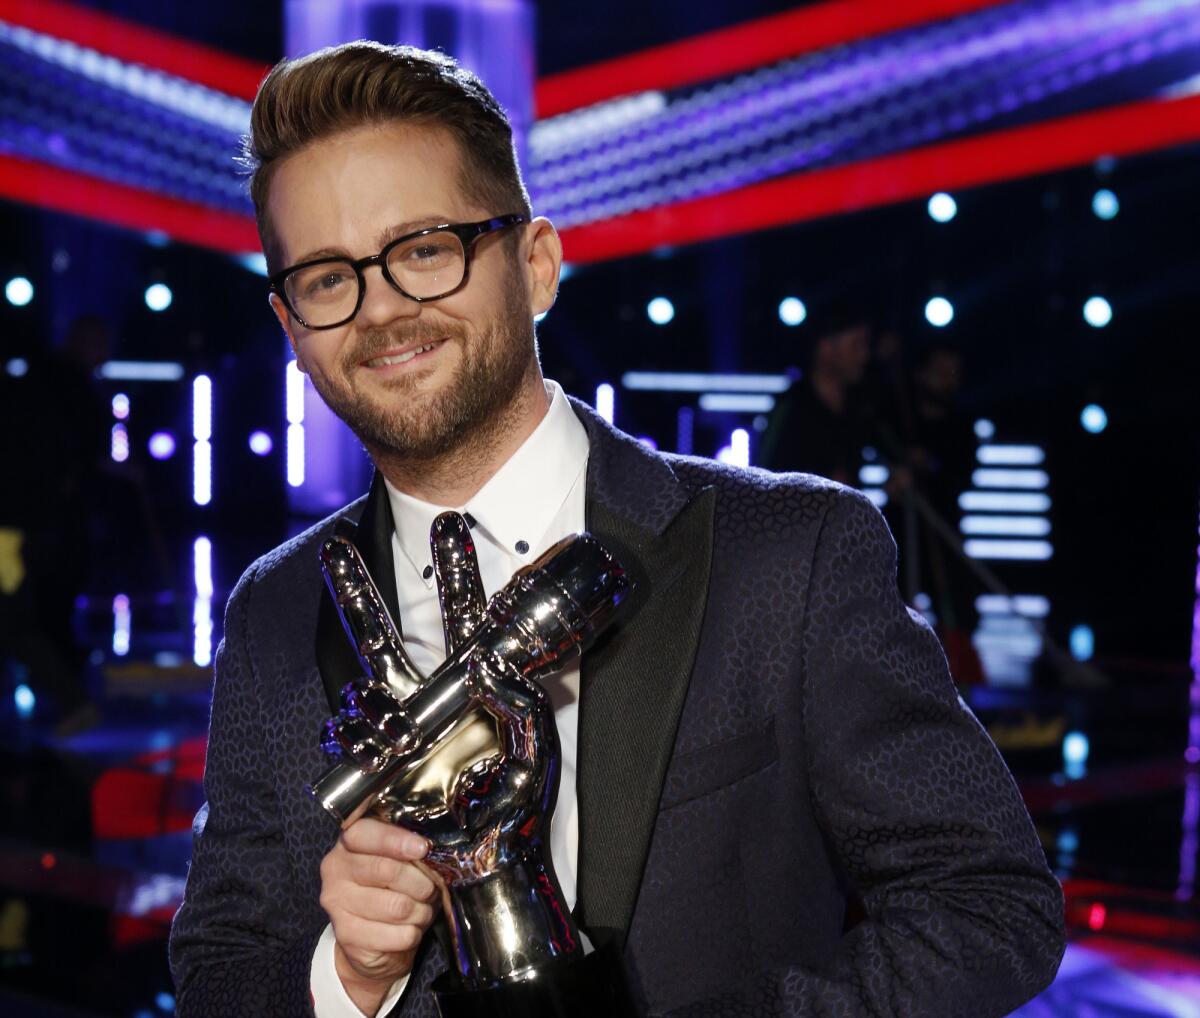 Josh Kaufman holds the trophy he won after placing first on the singing competition series "The Voice" on NBC.